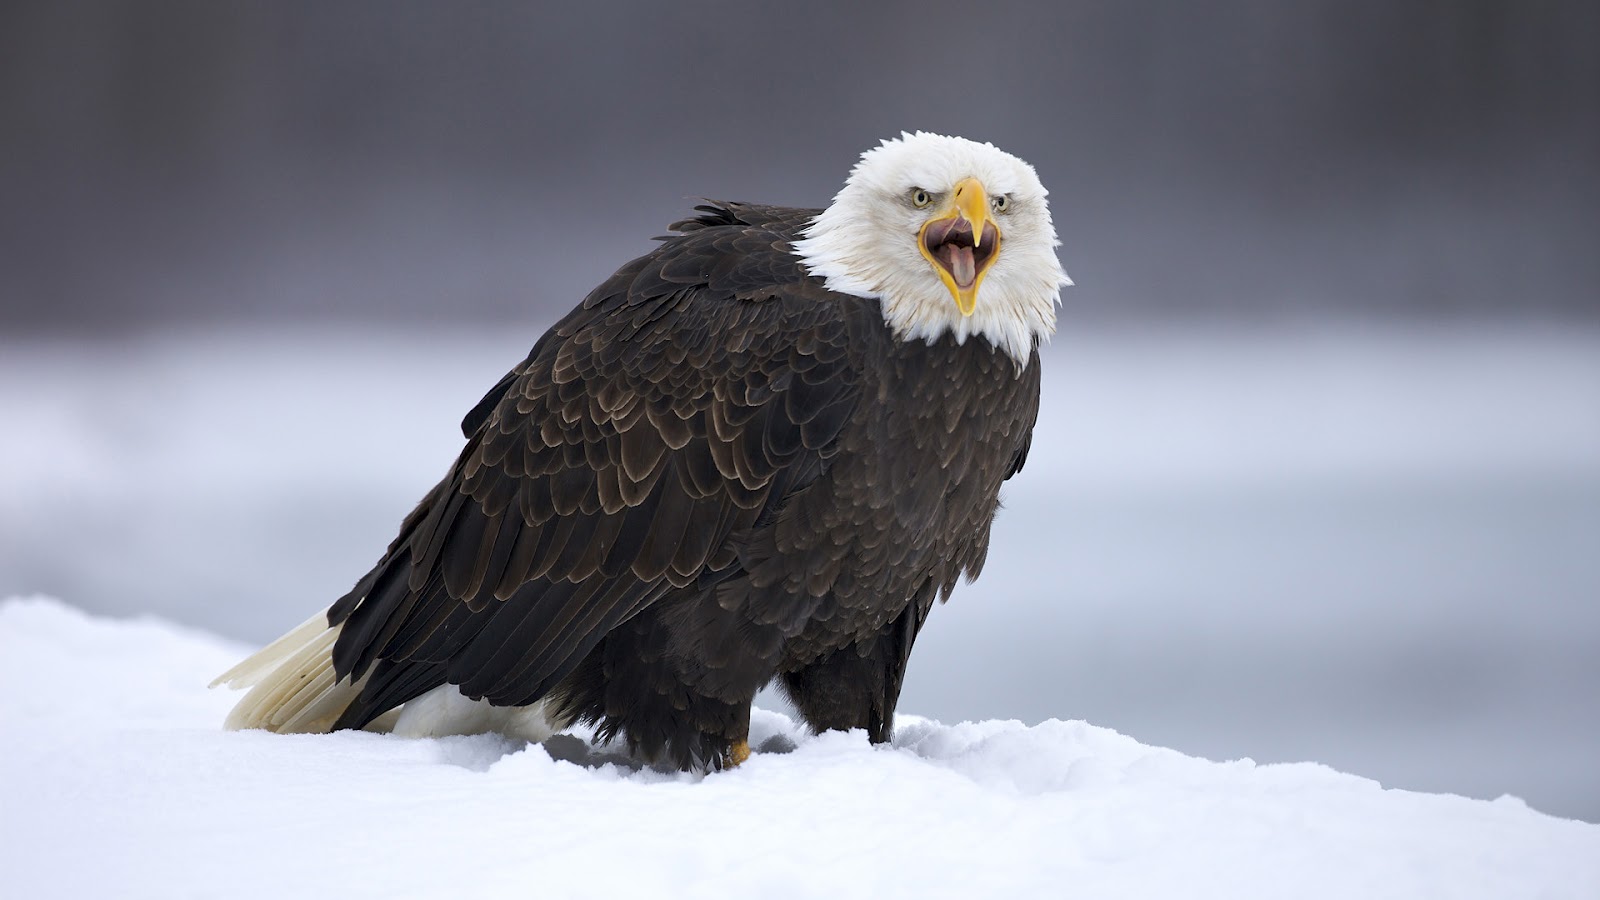 big-eagle-standing-in-the-snow-hd-animal-wallpaper-eagles.jpg